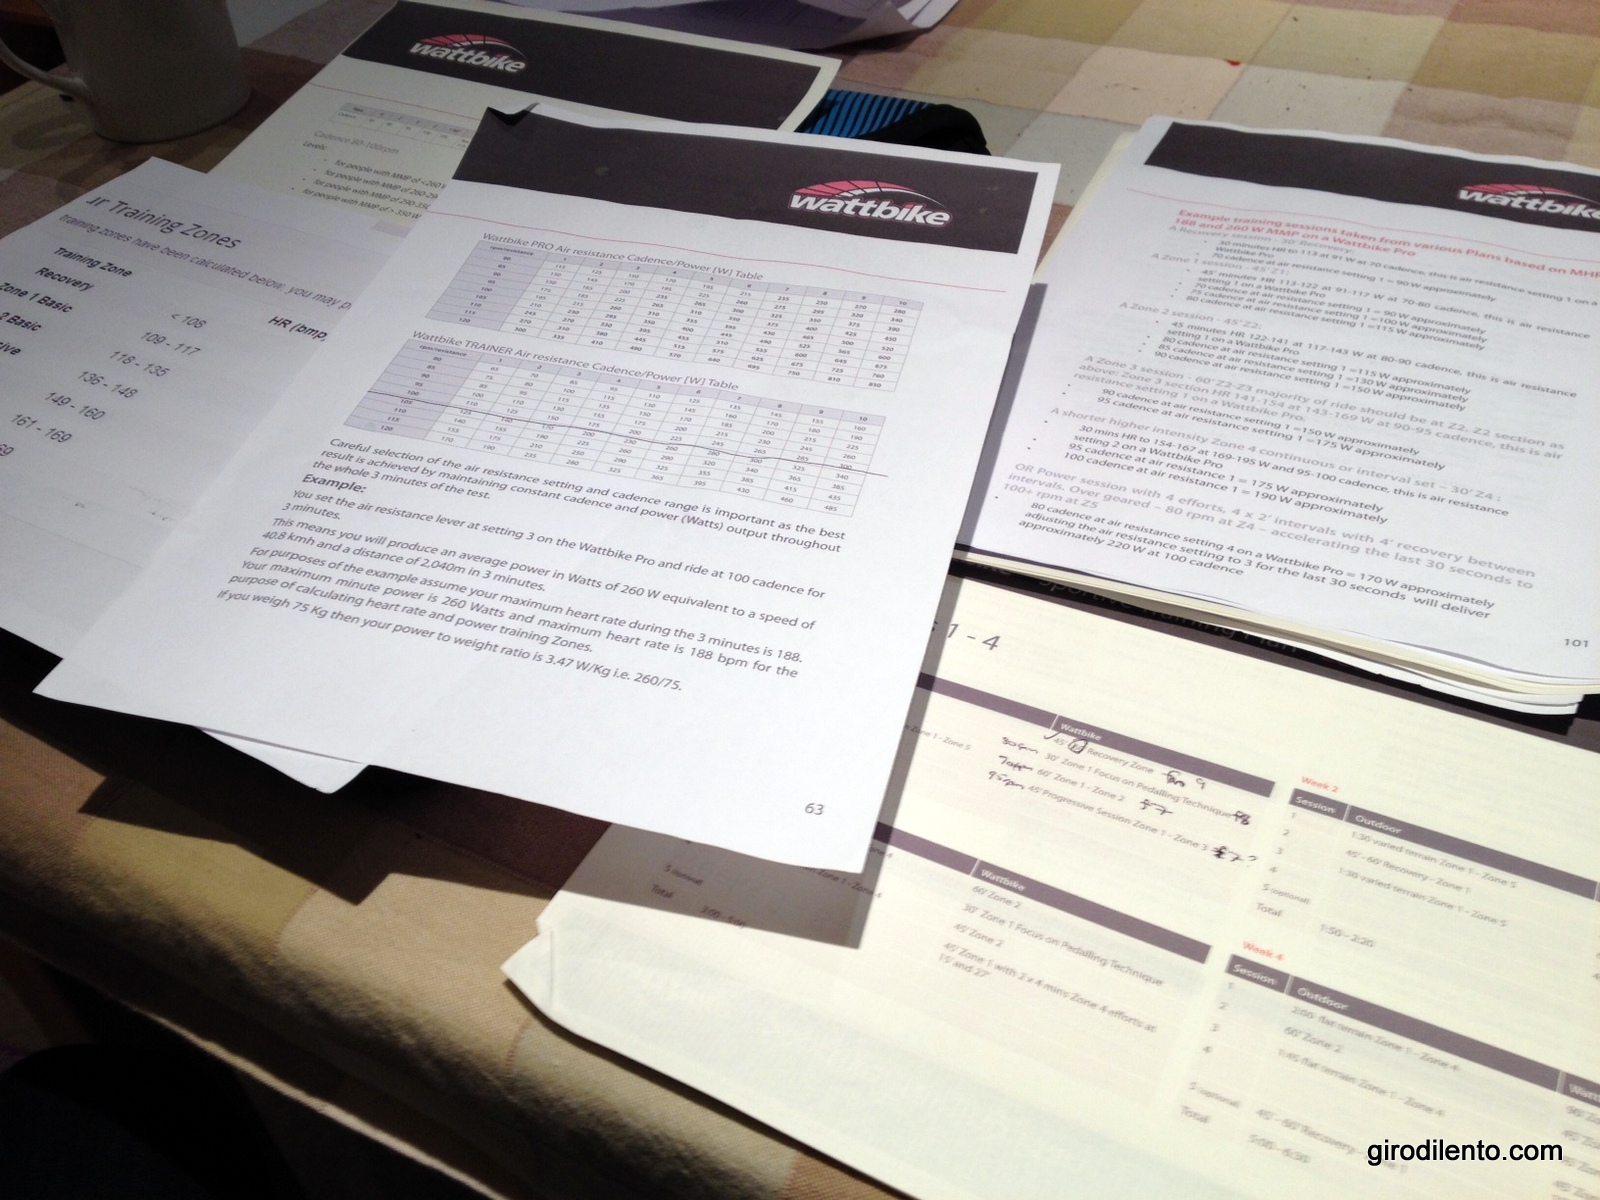 The paperwork I need to work out my RPM, resistance settings and heart rates zones for each session. Easy!